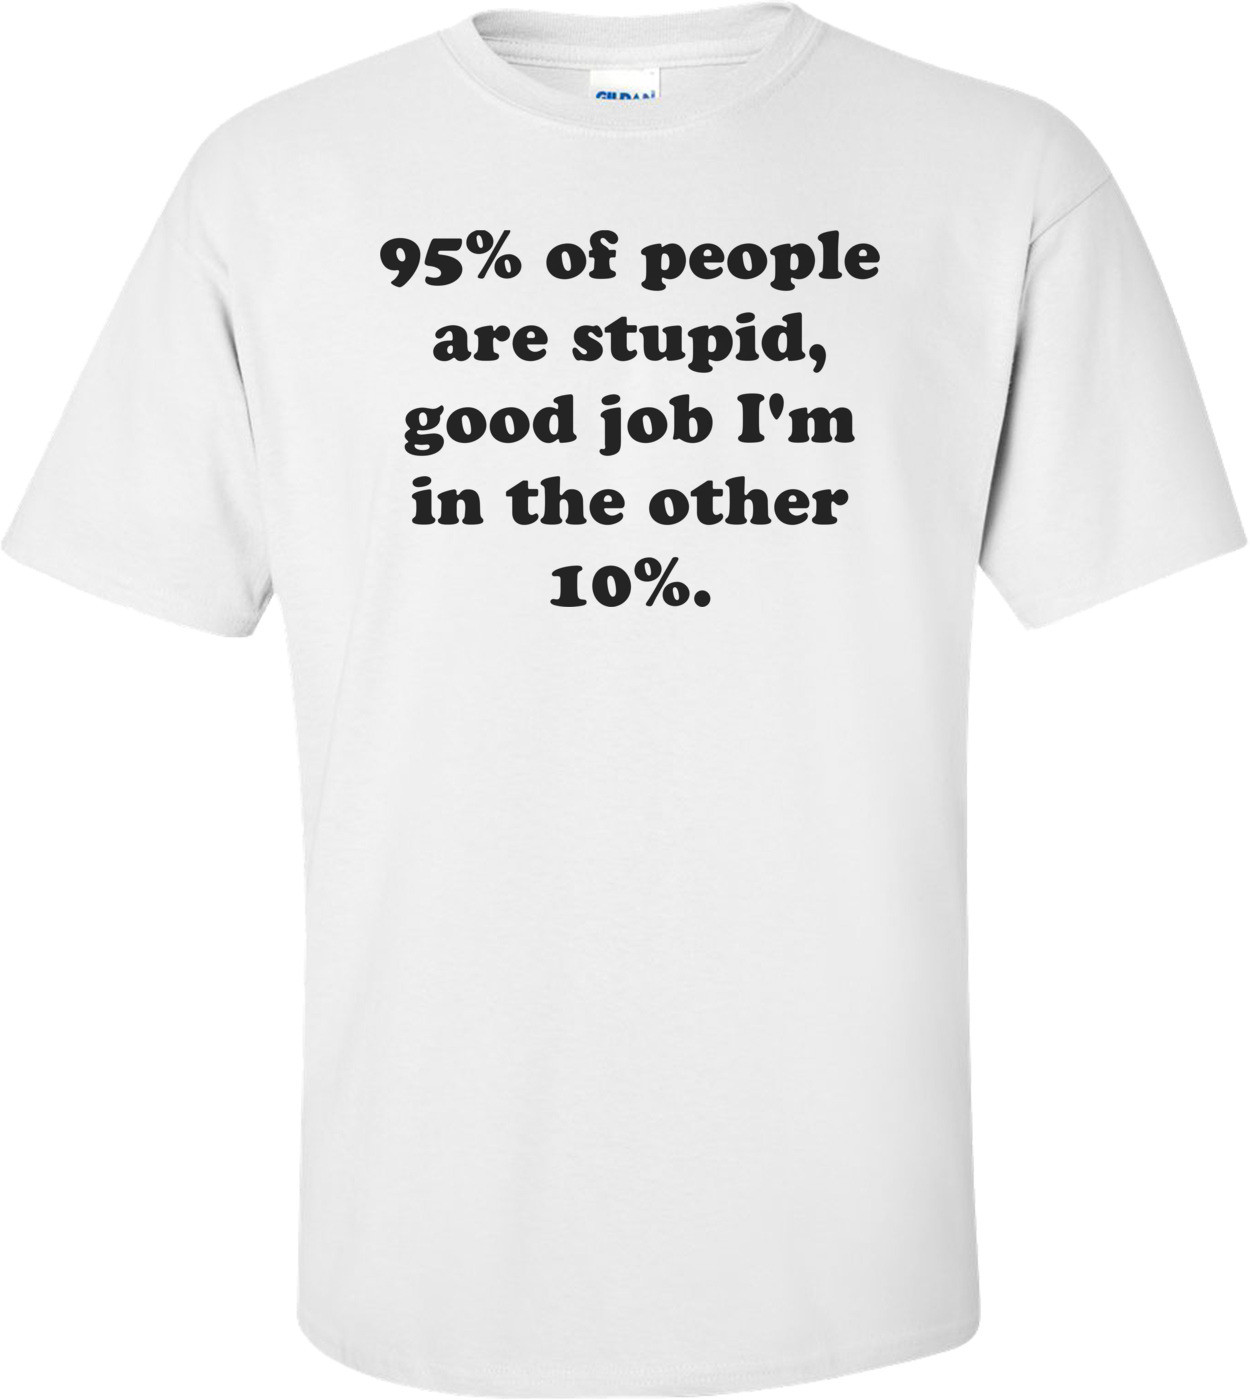 95% of people are stupid, good job I'm in the other 10%.